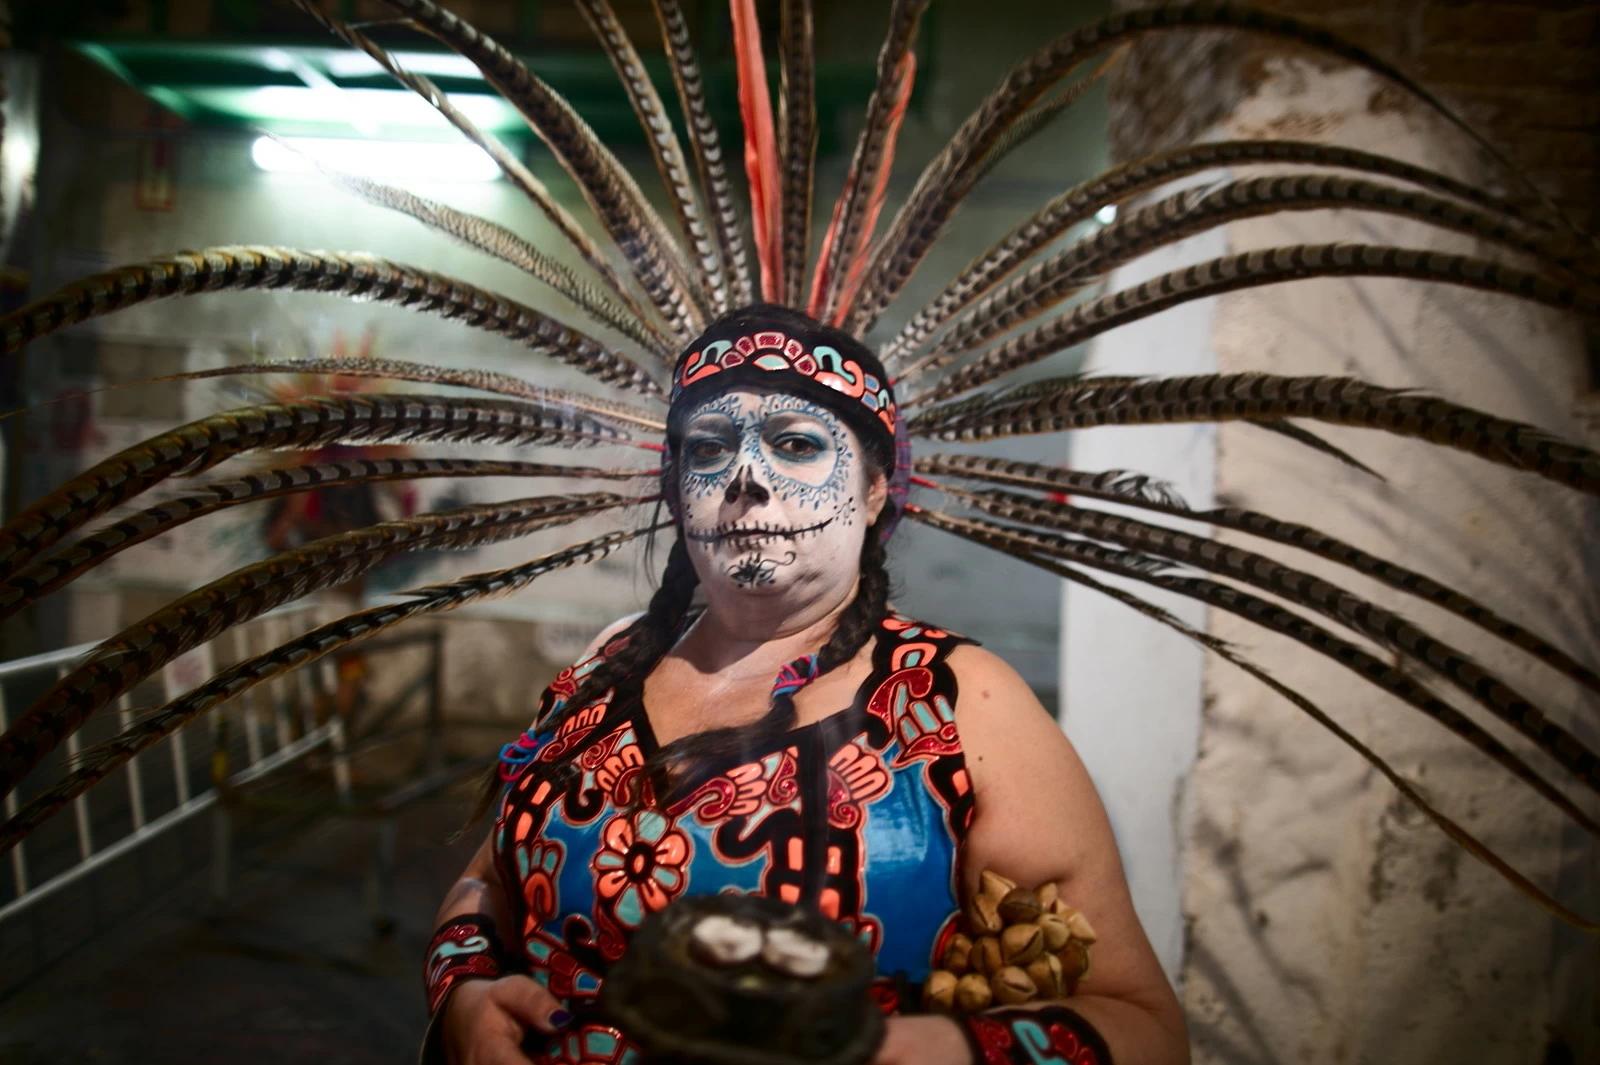 Day of the dead held in La Tabacalera, Madrid. Photo and story by Jose Hinojosa